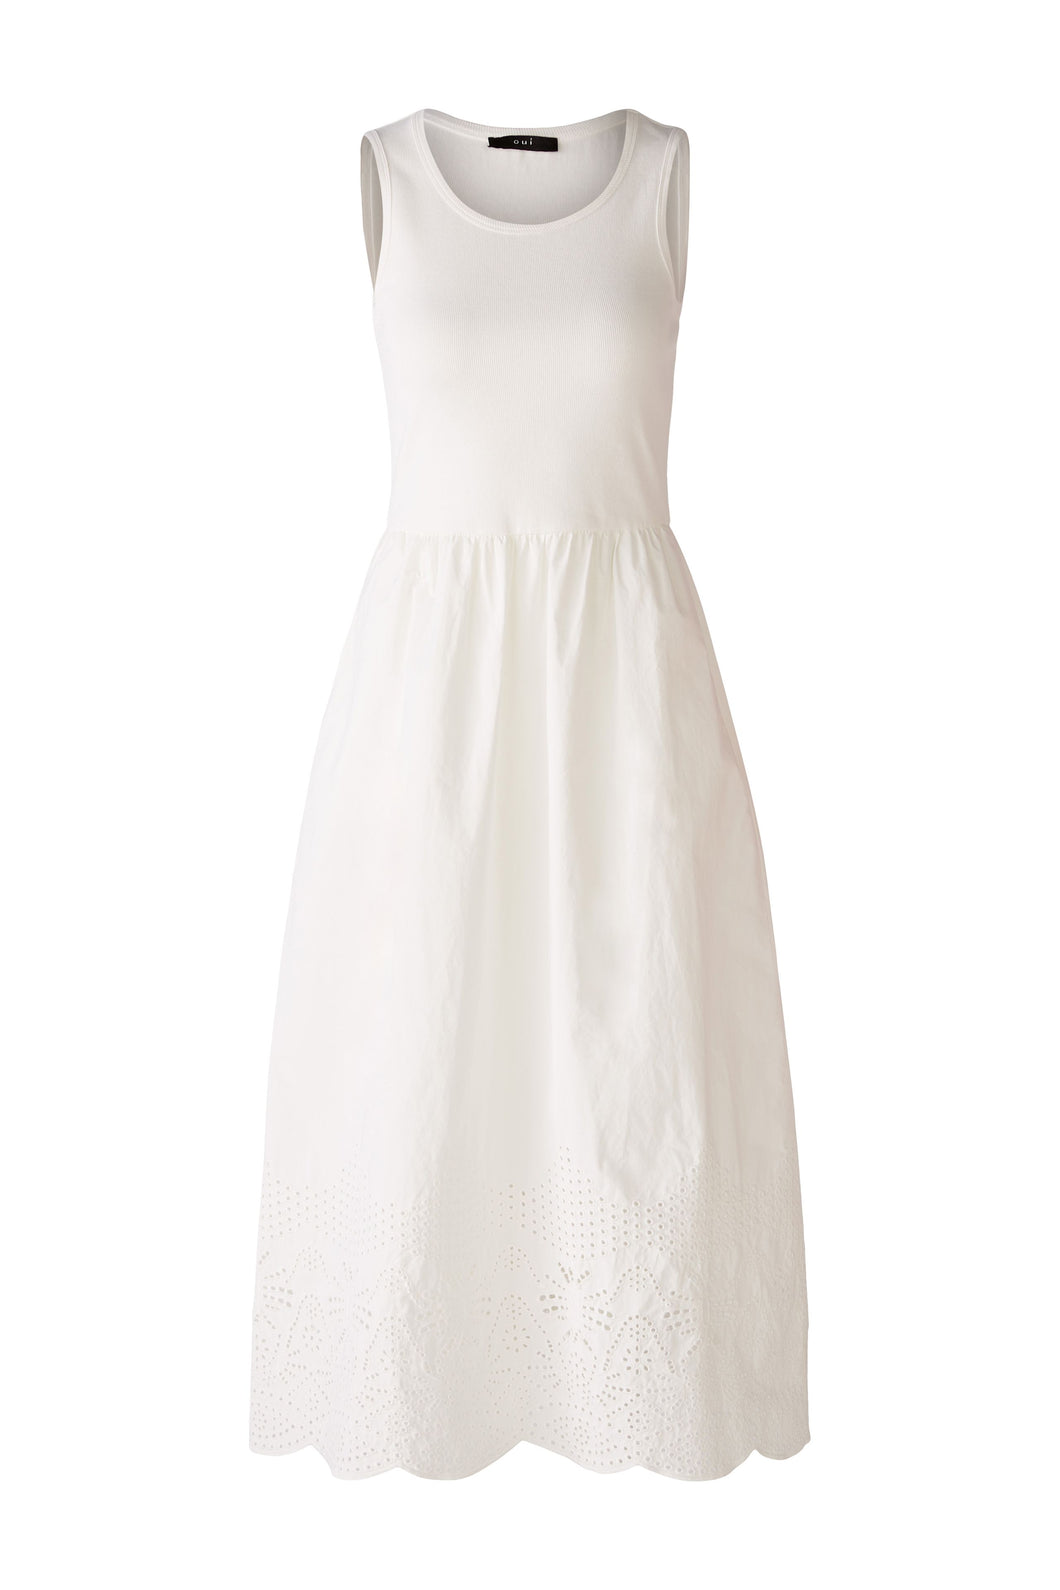 Oui - Embroidered Skirt Day Dress in White